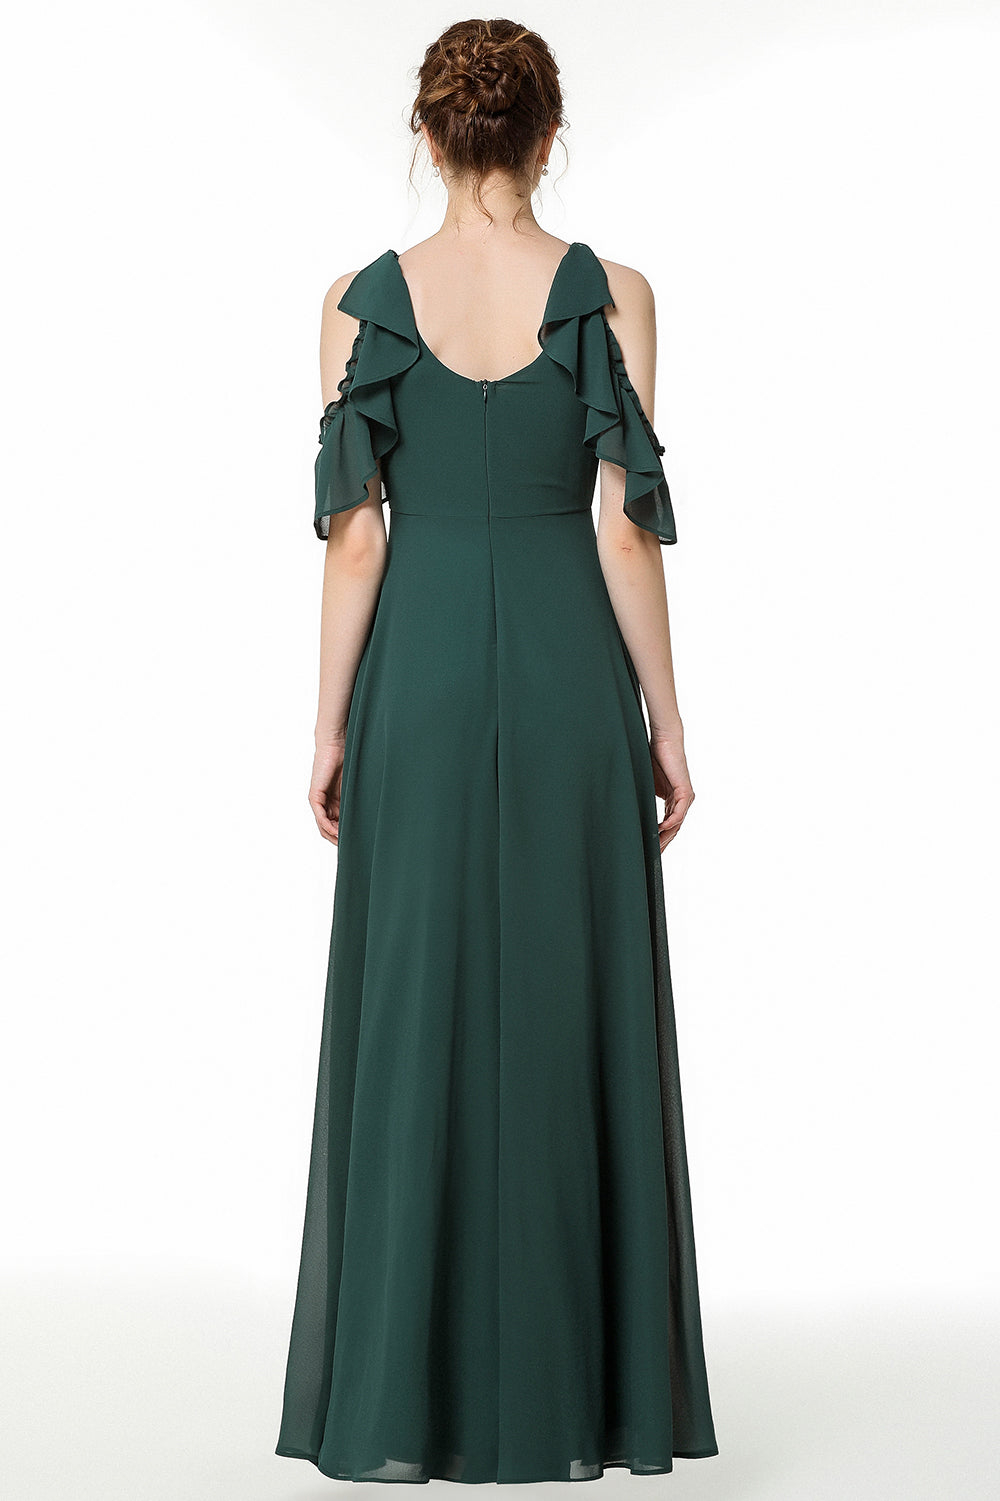 Load image into Gallery viewer, Chic Long Chiffon A-Line Bridesmaid Dress With Ruffles Embellishment-BIZTUNNEL
